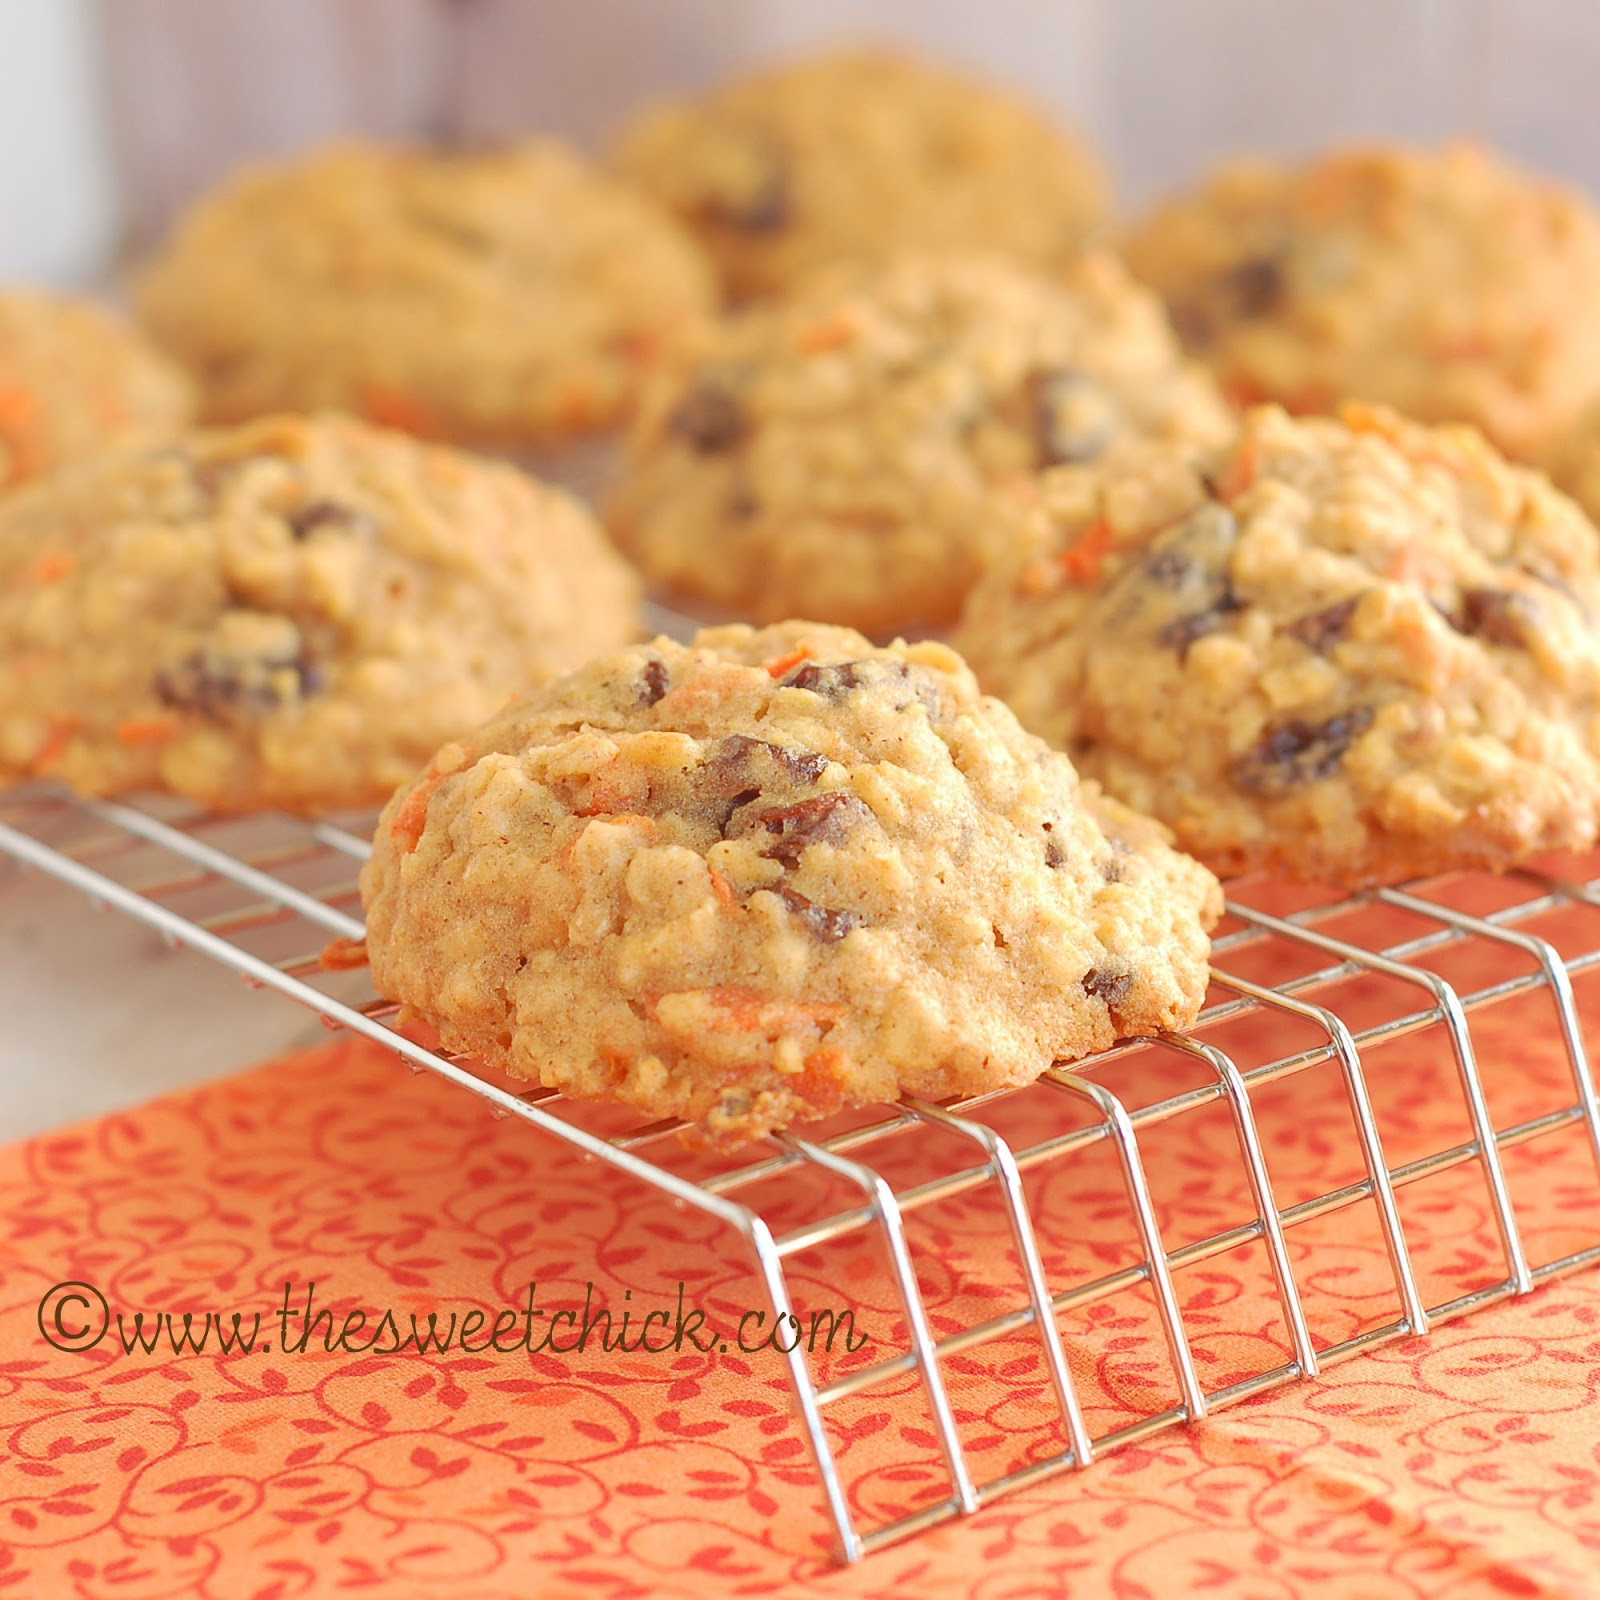 Healthy Oatmeal Raisin Cookies With Honey
 The Sweet Chick Honey Carrot Oatmeal Raisin Cookies